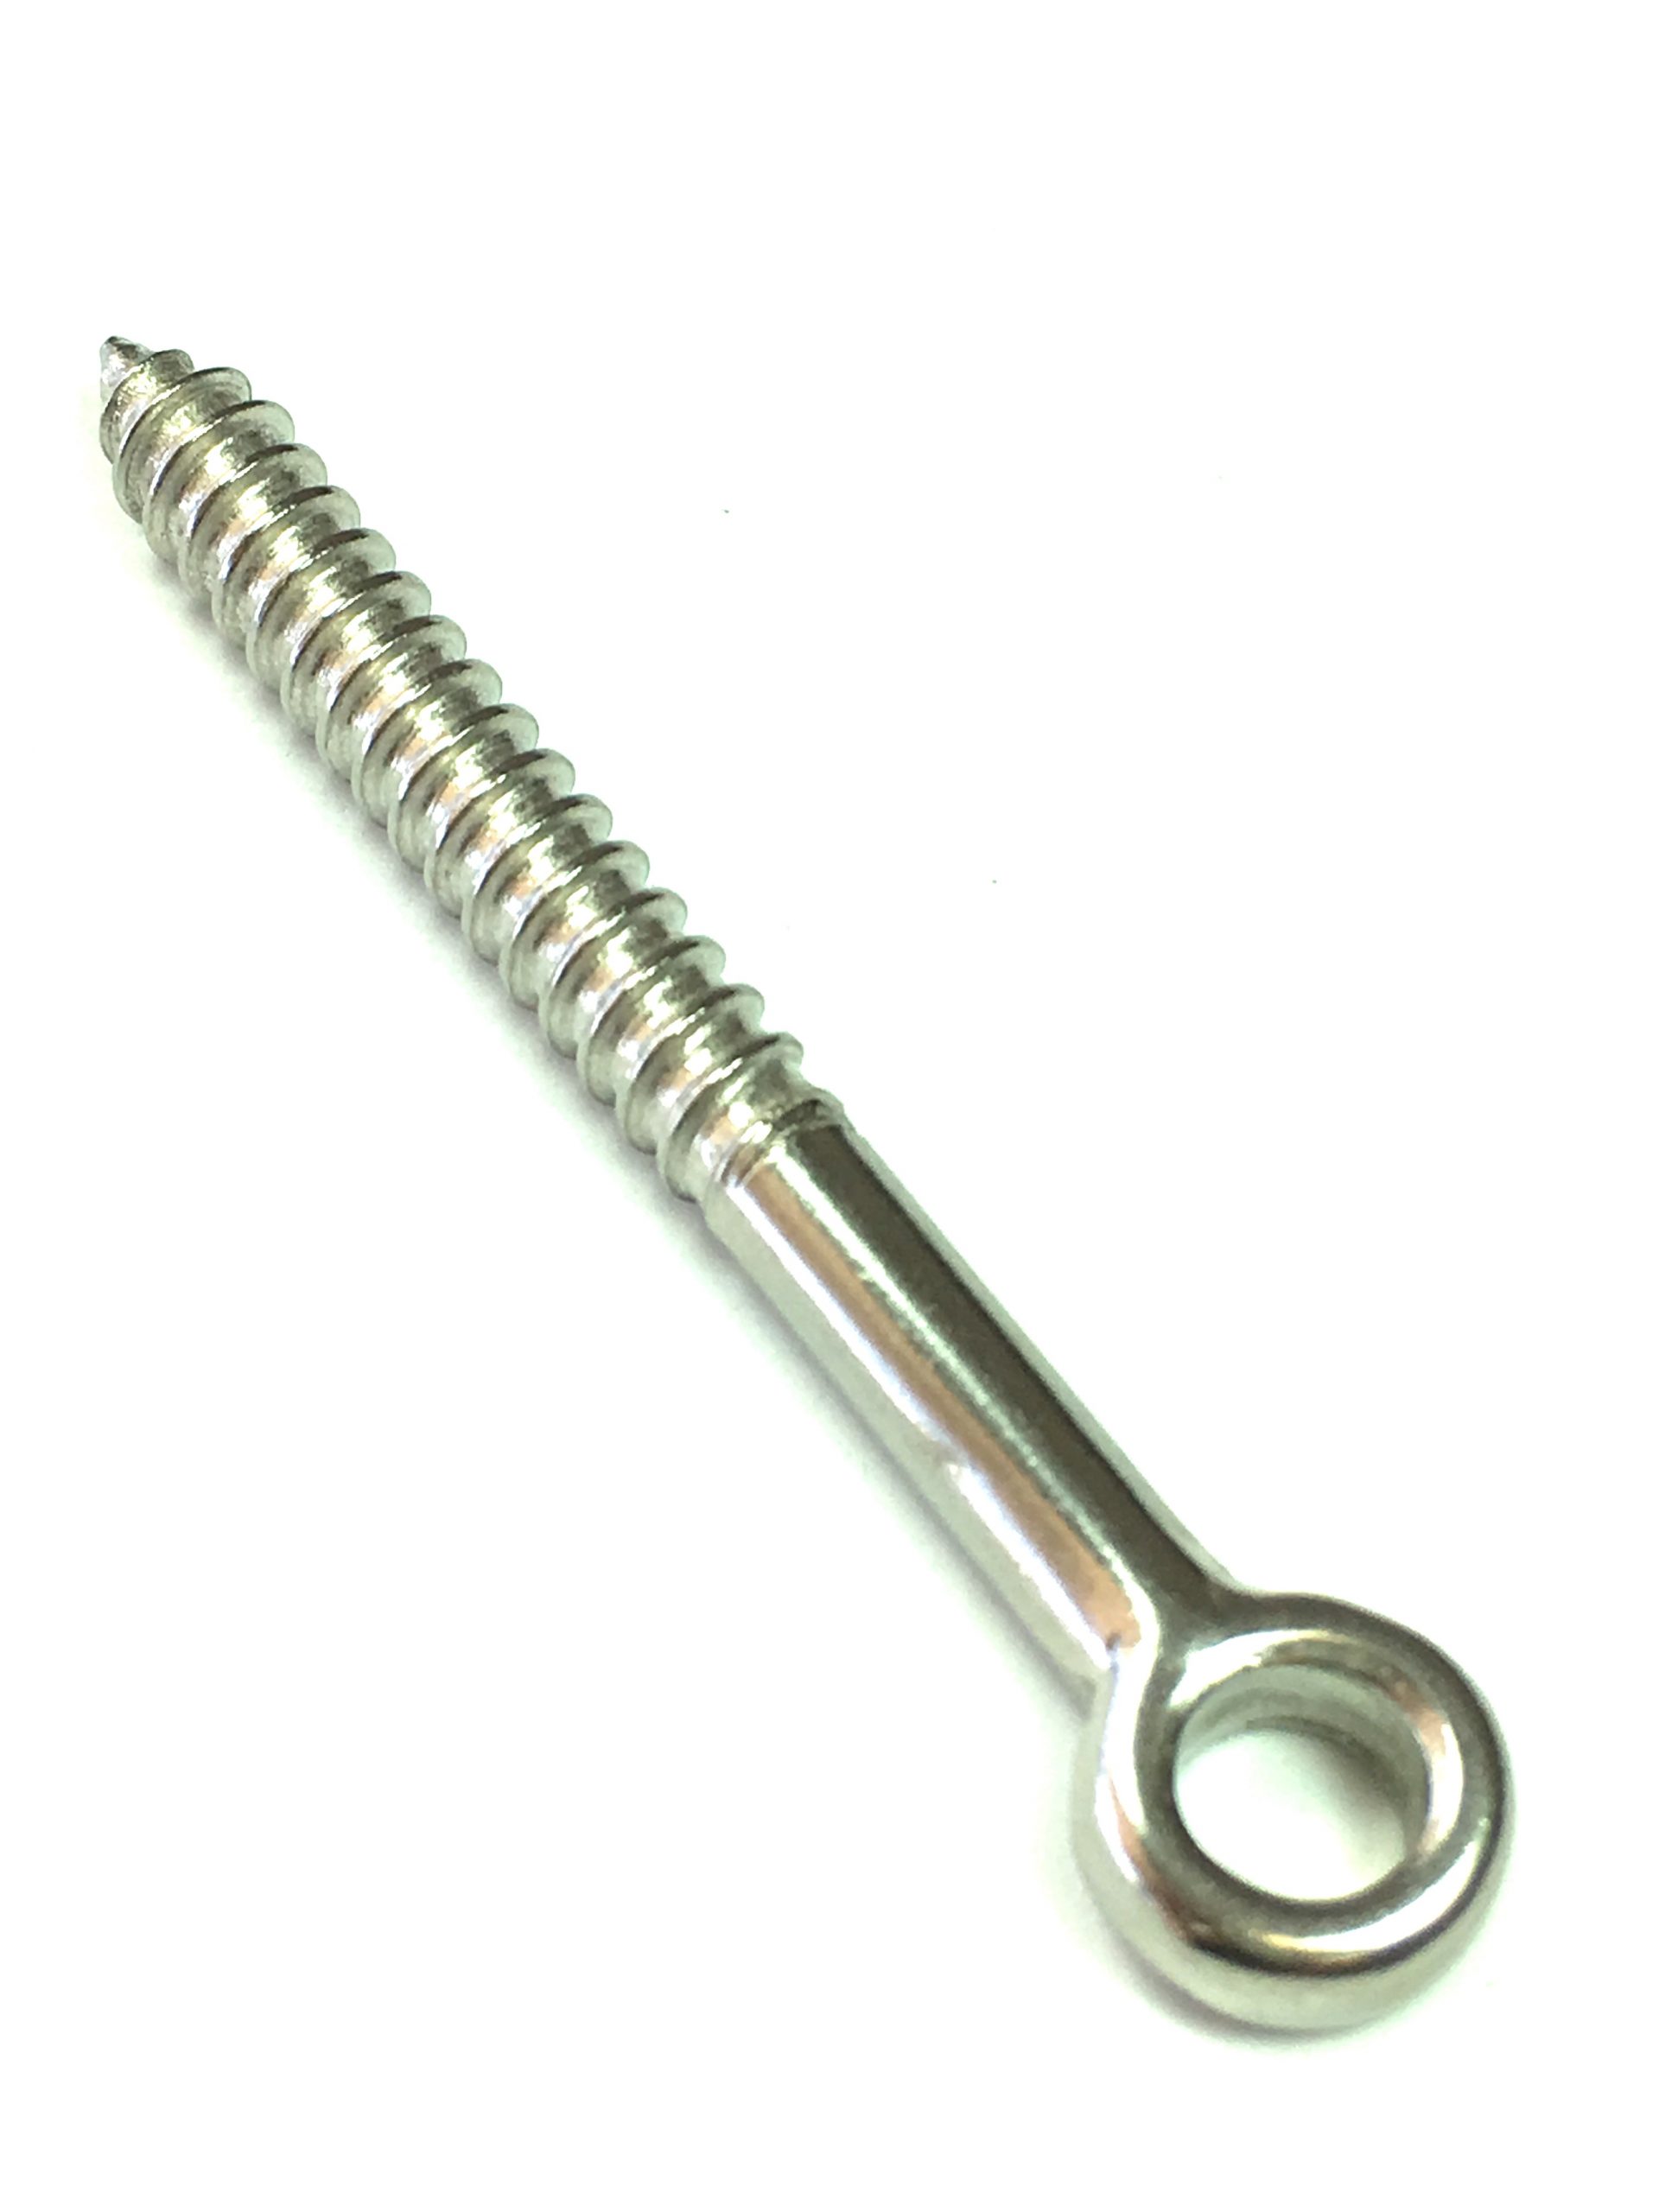 T316 Stainless Steel Tensioner for Cable Railing with Lag Screw for 532 Cable